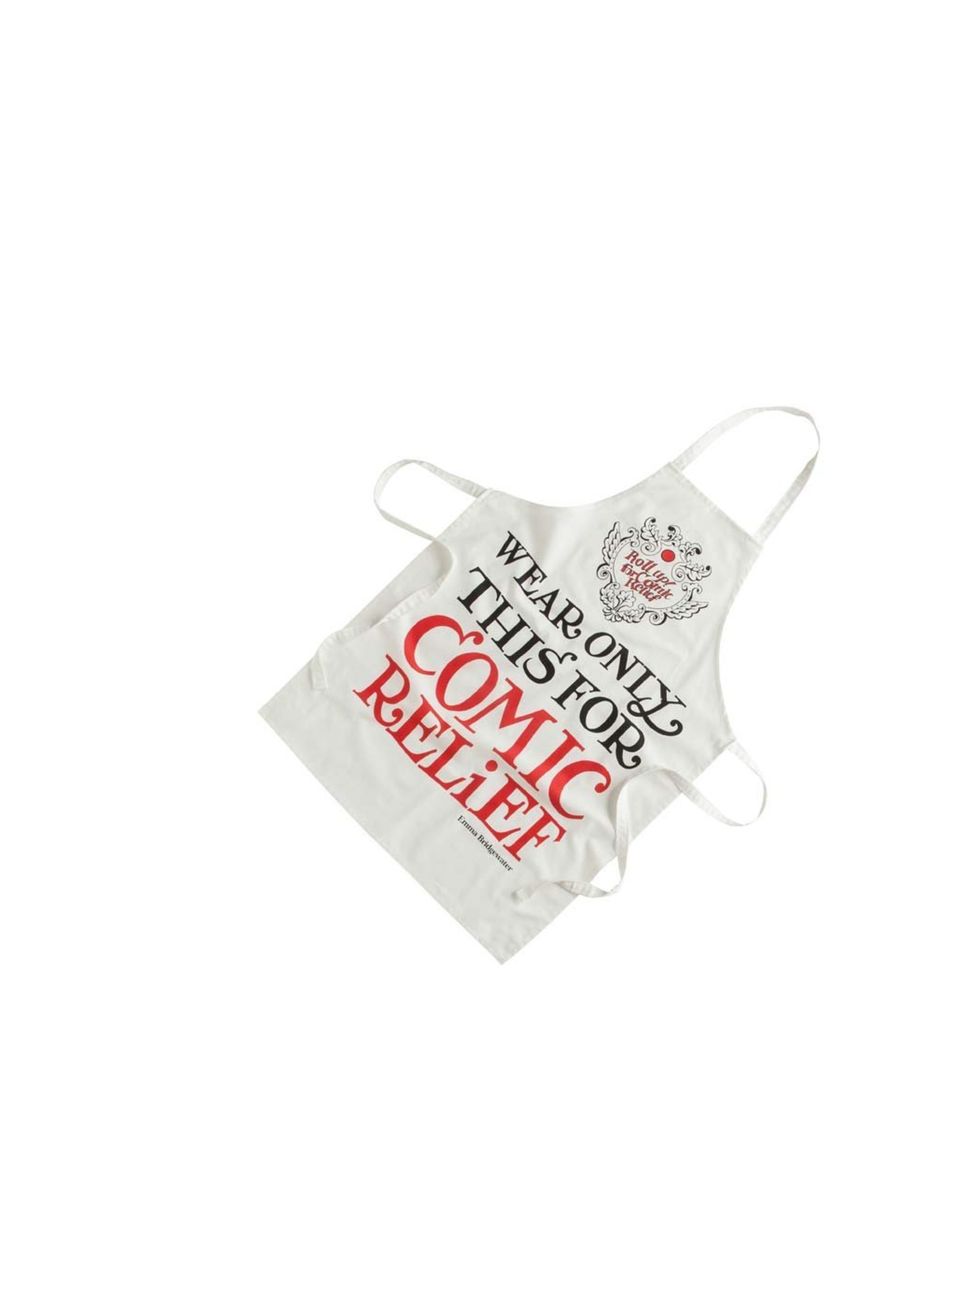 <p>Emma Bridgewater apron, £12.99 (with at least £6.50 going to Comic Relief), available at <a href="http://www.tkmaxx.com/page/home">TK Maxx</a></p>